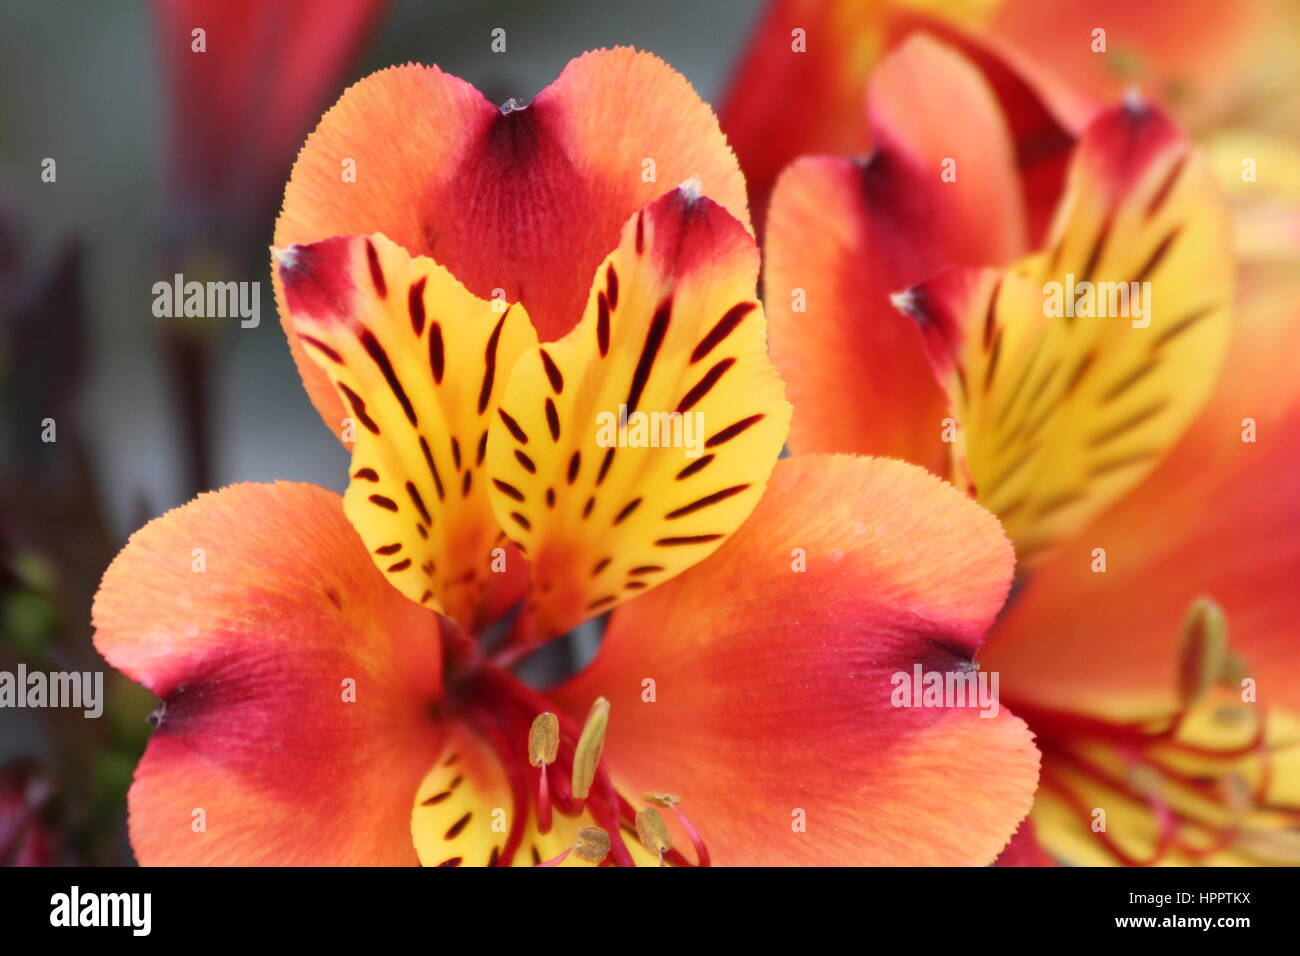 Vibrant orange orchids and lily flowers Stock Photo